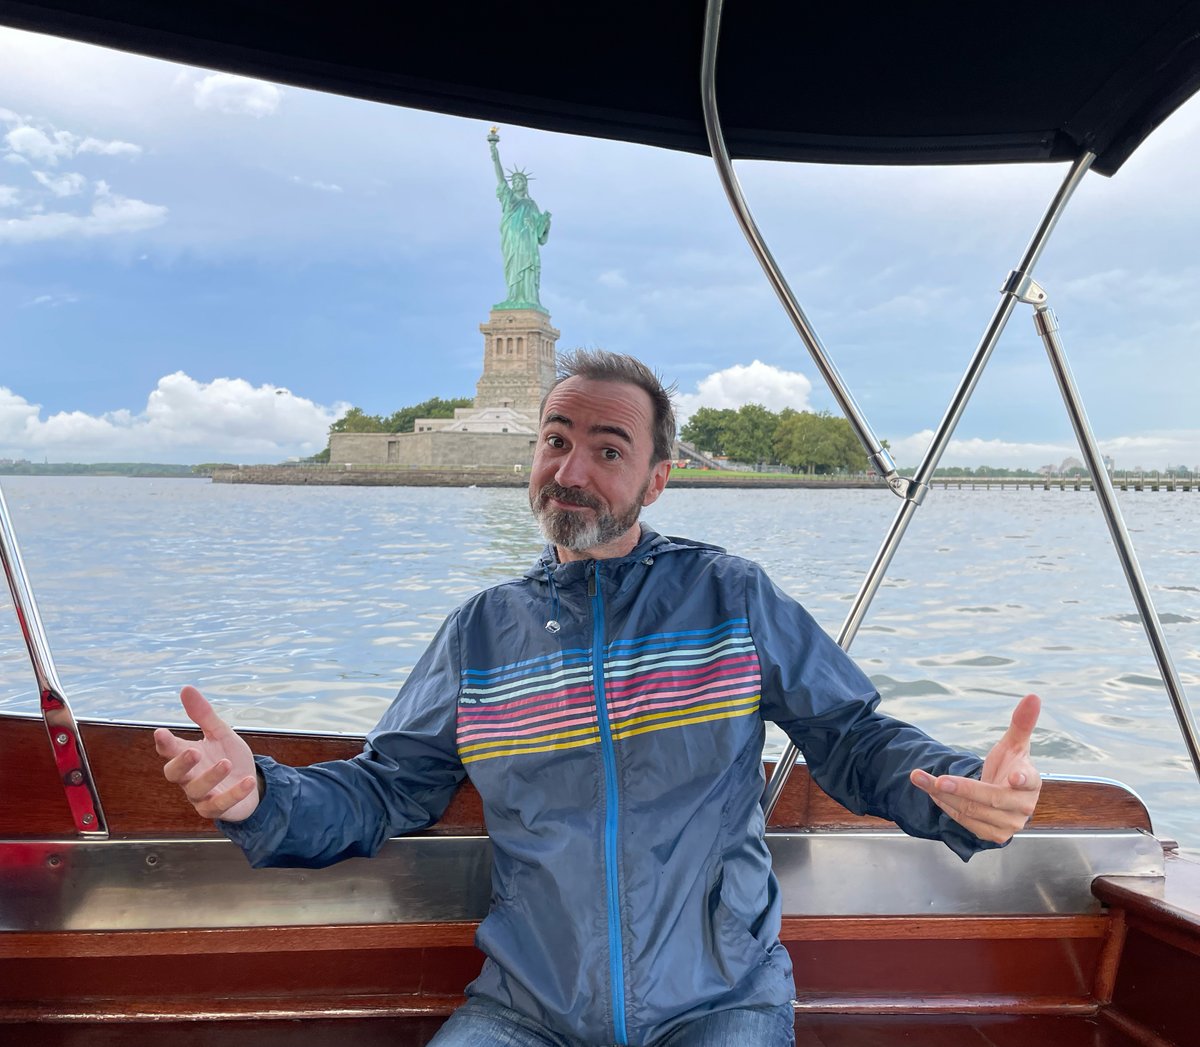 NYC! Lady Liberty and I want to know who is coming to @brooklynsteel tonight? Huge thanks to everyone who came out to Radio City Music Hall last night! Special thanks to @moveablefeastny for an unforgettable ride. theshins.com/tour.html